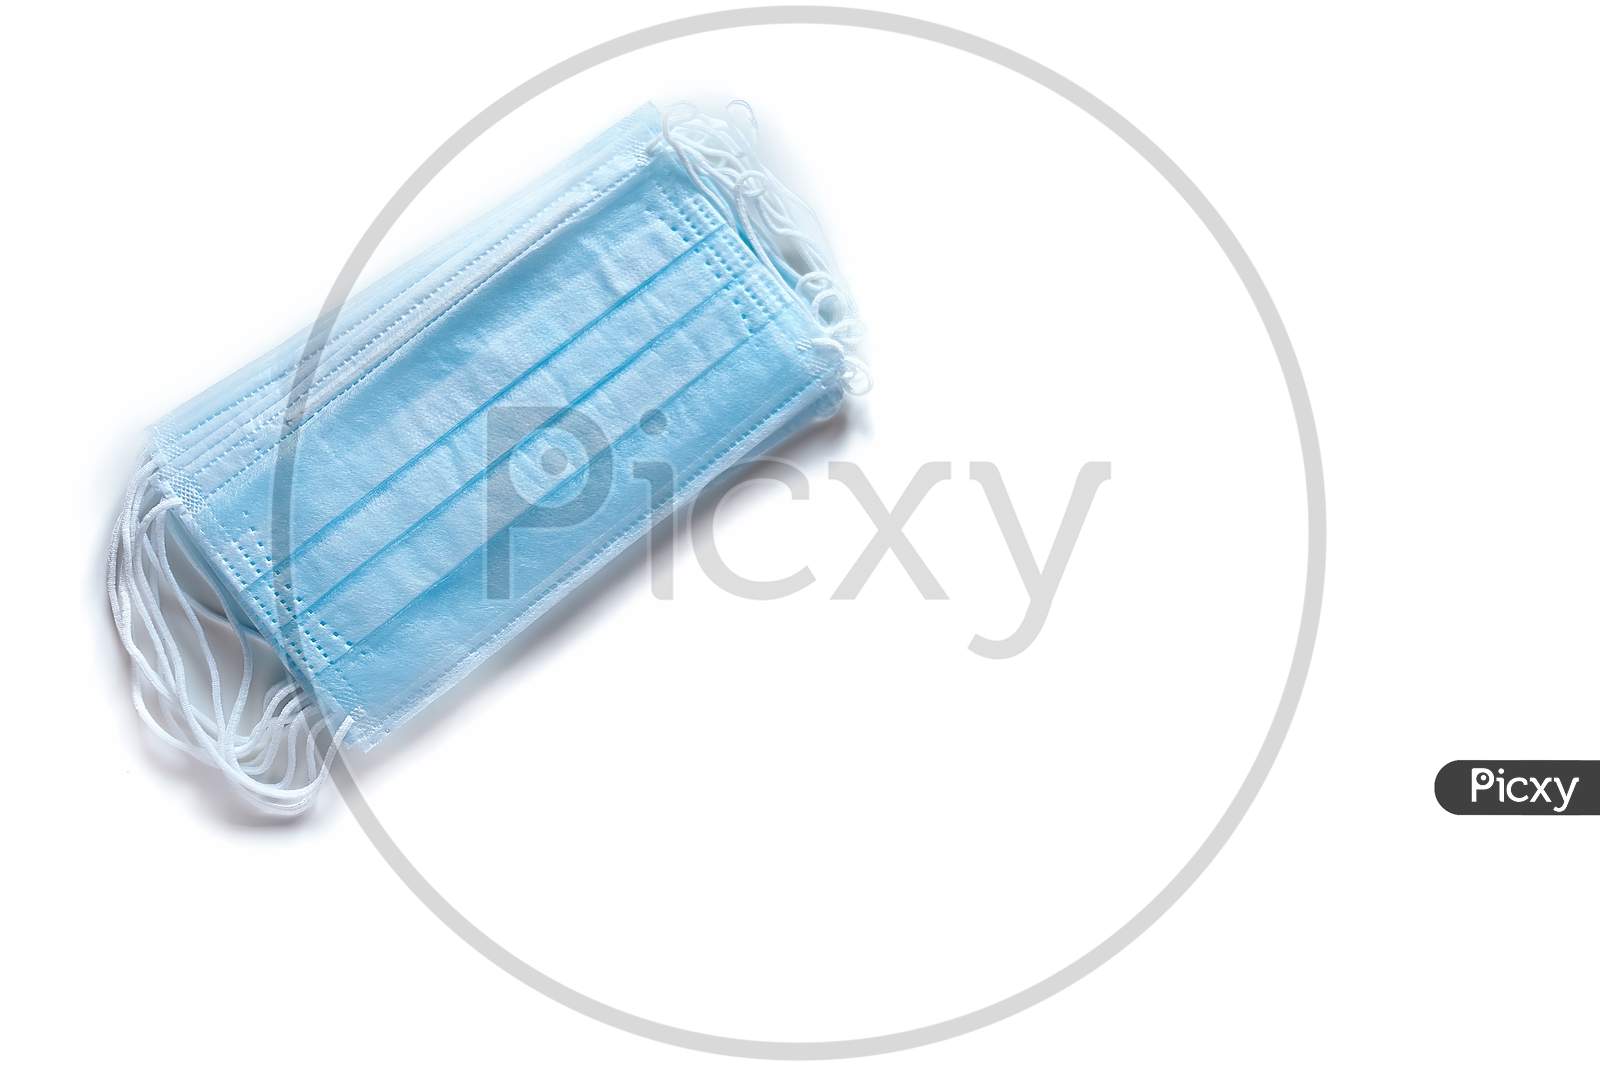 Coronavirus Covid-19 Pandemic. Antiviral Medical Mask For Protection Against Corona Virus. Surgical Protective Mask. Medical Protective Masks Isolated On White Background. Quarantine, Stay At Home.